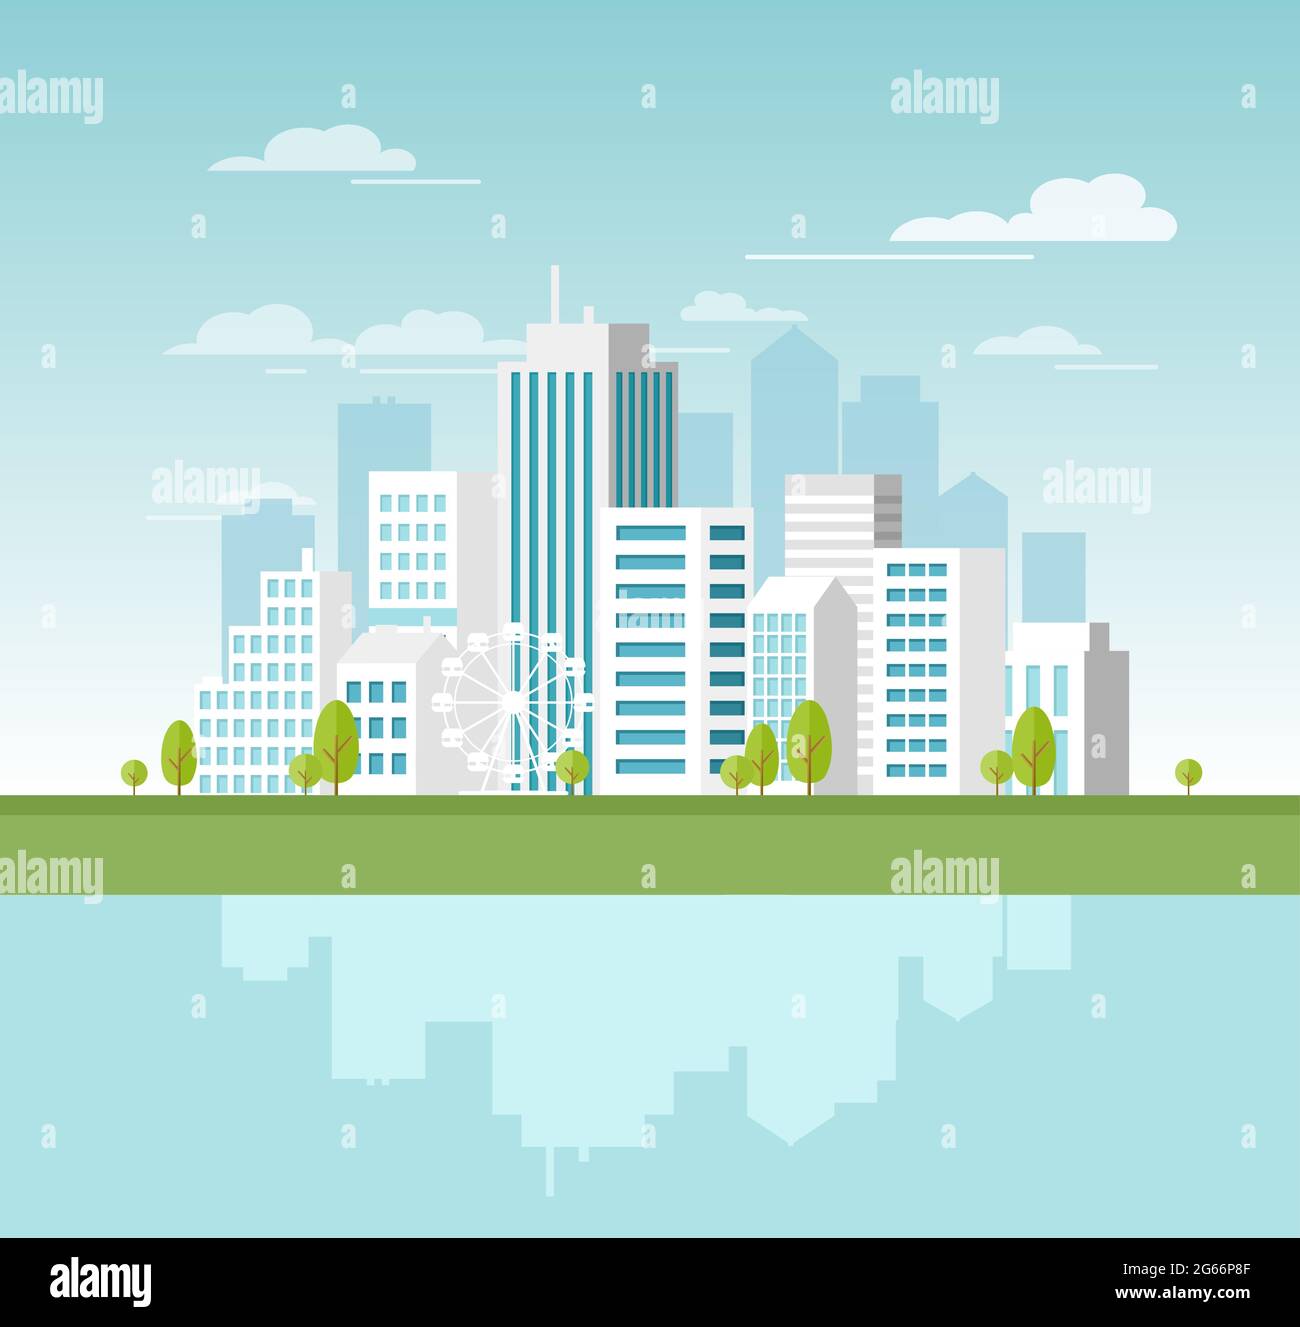 Vector illustration of modern urban landscape with white skyscrapers and big buildings. Concept website template for banner design in flat style. Stock Vector